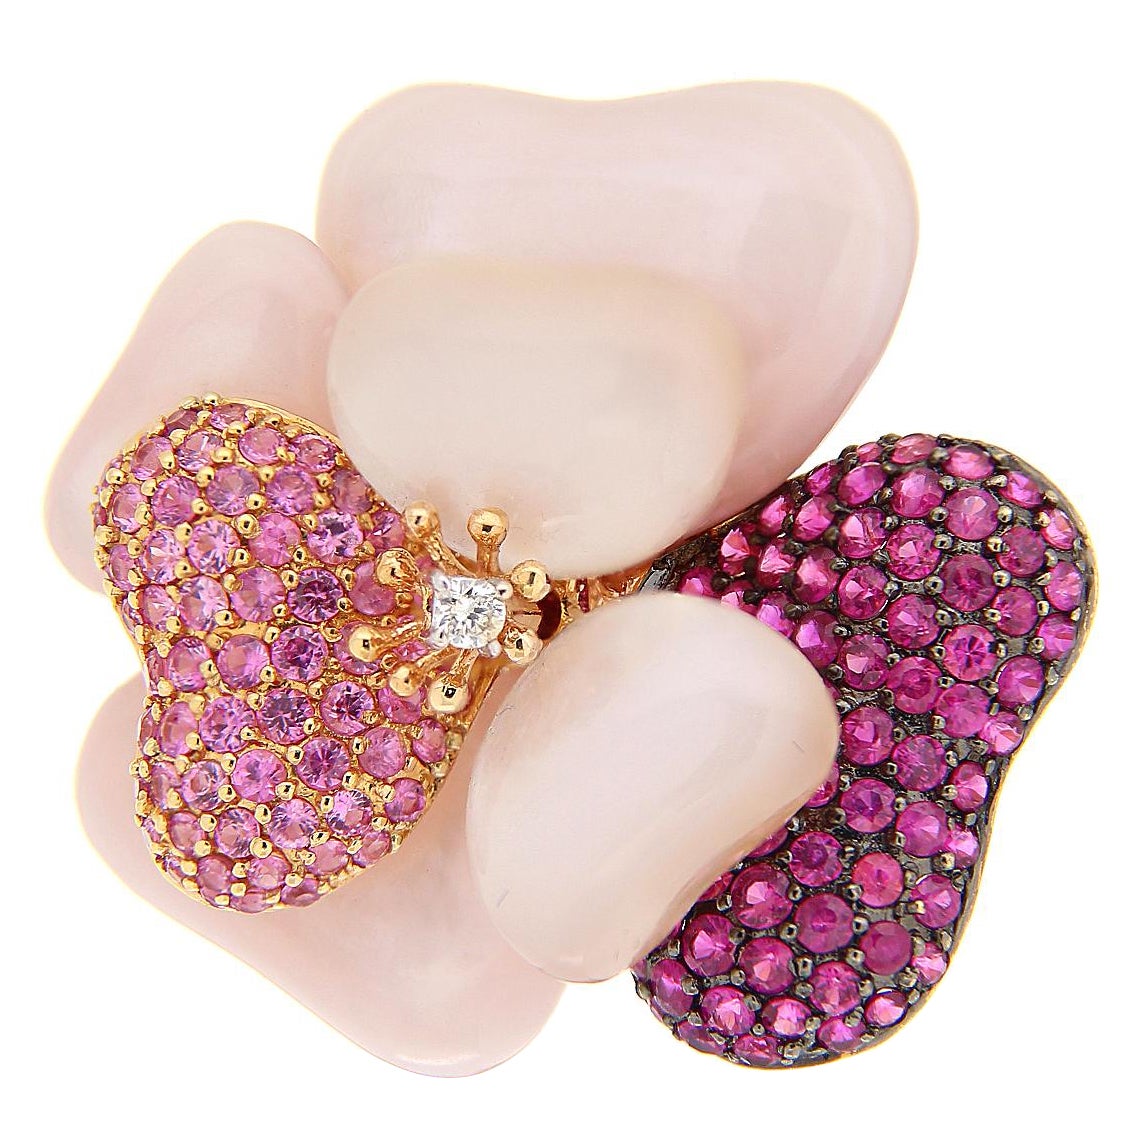 18kt Rose Gold Flower Ring Mother of Pearl Pink Sapphires 0.92 Ct Rubies 1.53 Ct